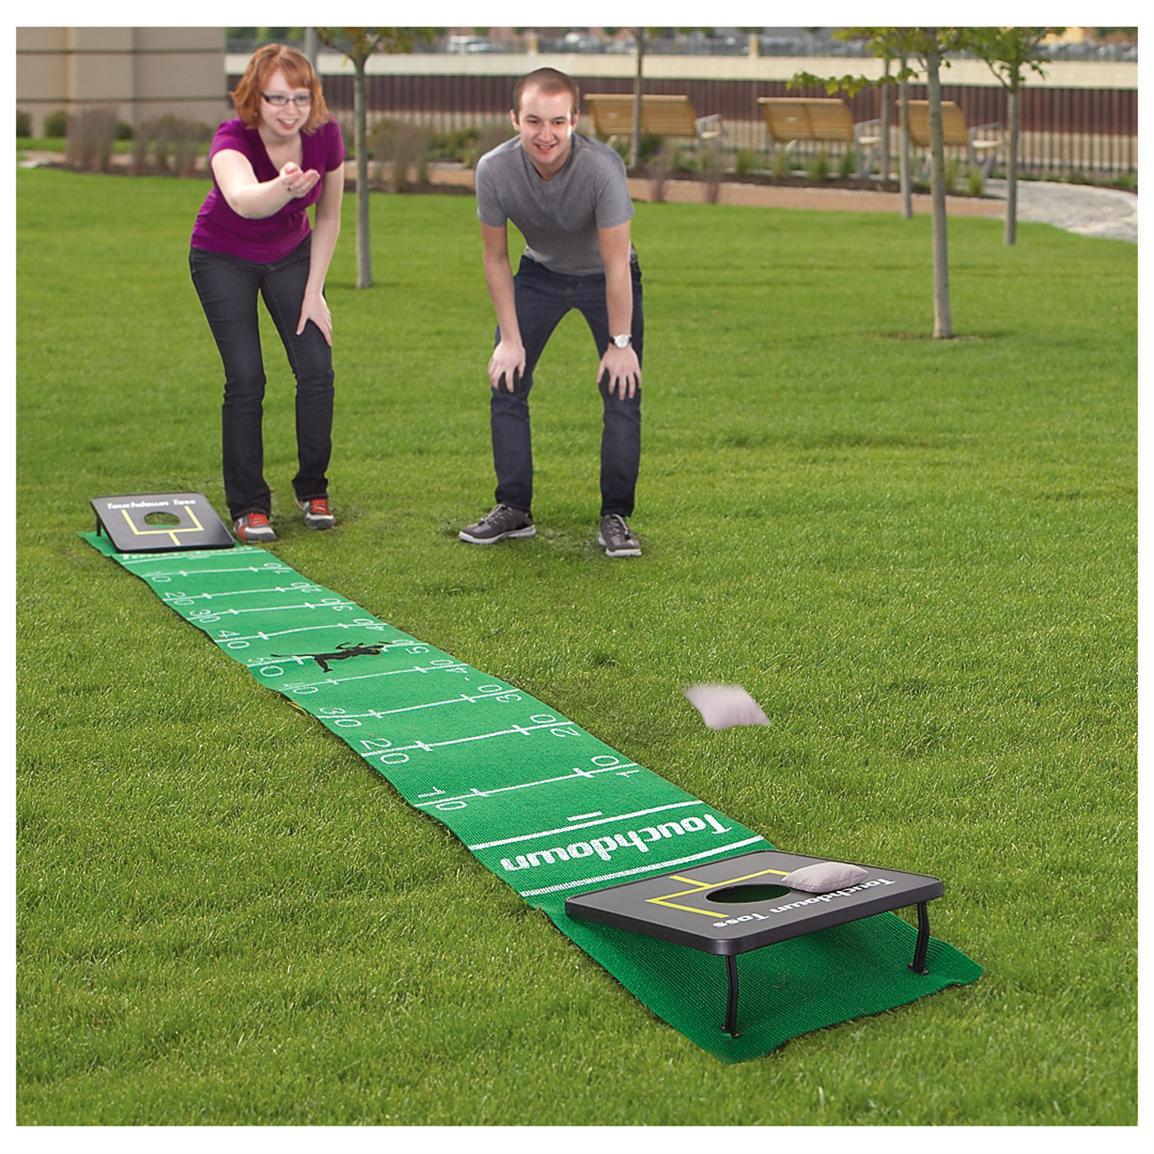 2 - in - 1 Bean Bag Toss Game - 281891, Yard Games at Sportsman&#39;s Guide